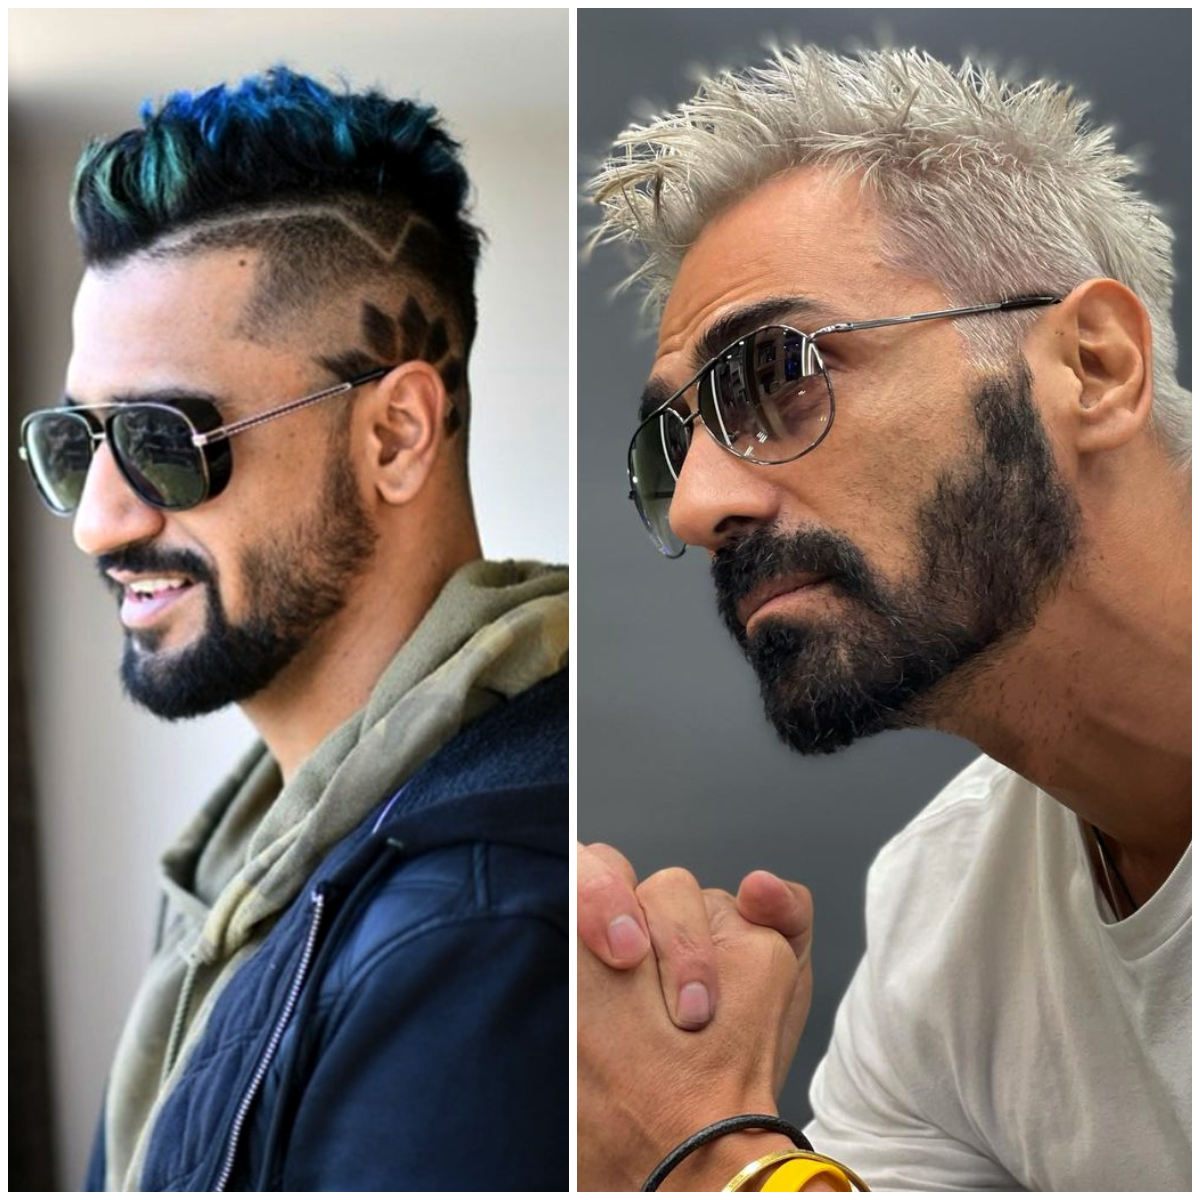 20 Indian Mens Hairstyles To Get Ravishing And Bold Look | Indian bollywood  actors, Indian hairstyles men, Bollywood actors